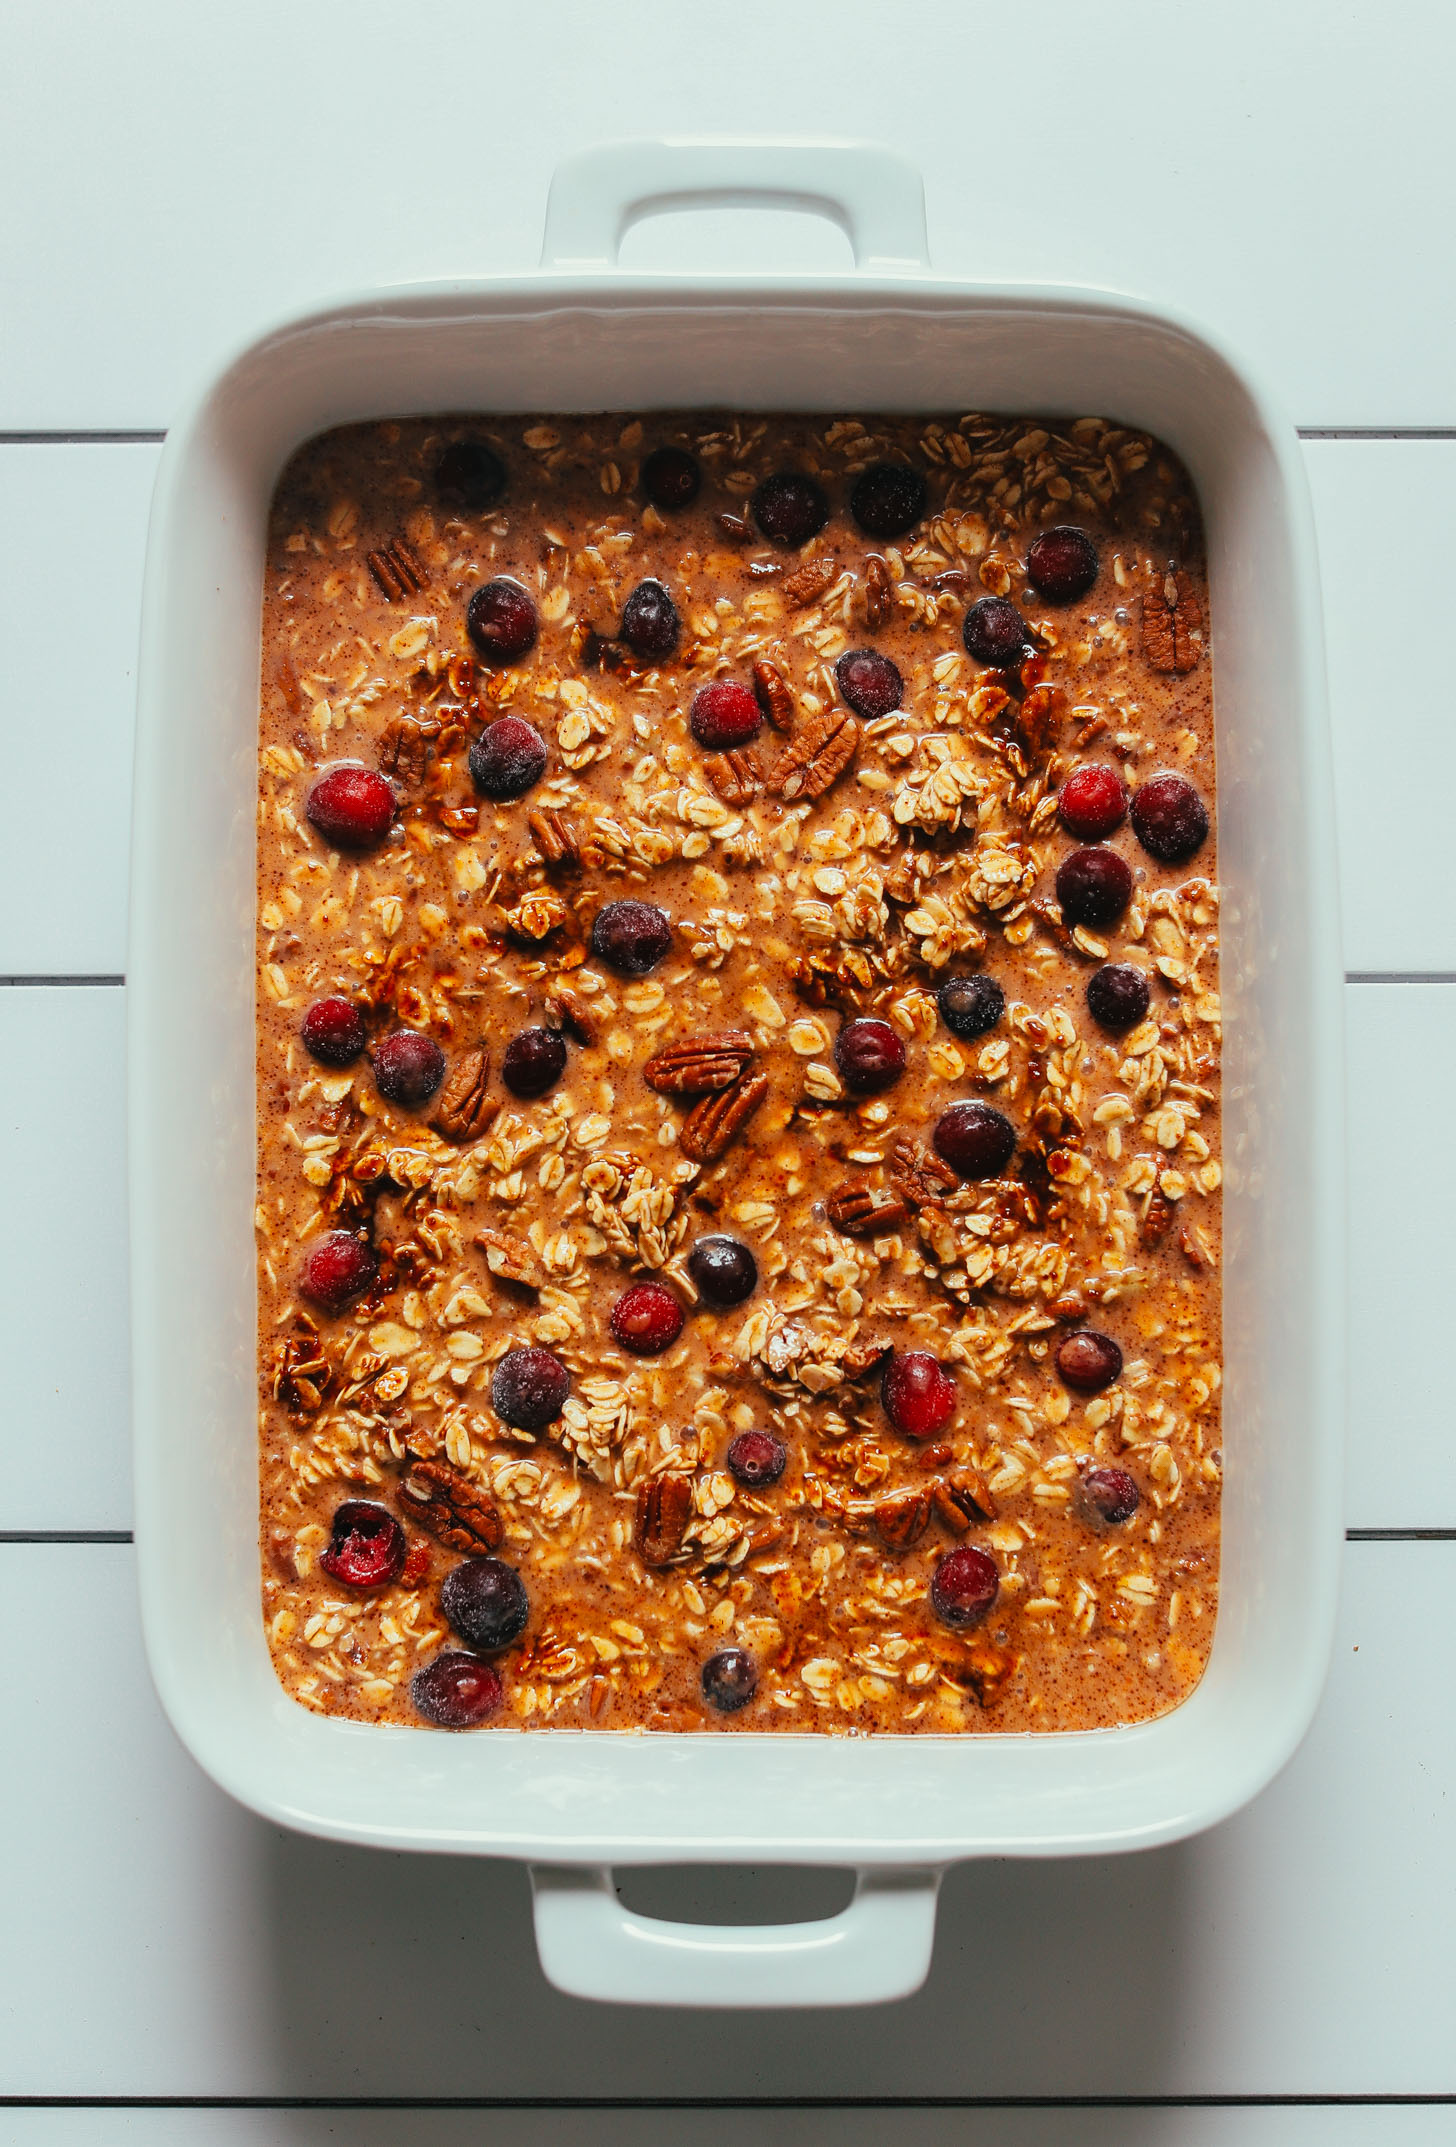 Baking dish of our Vegan Pumpkin Baked Oatmeal with Cranberries recipe